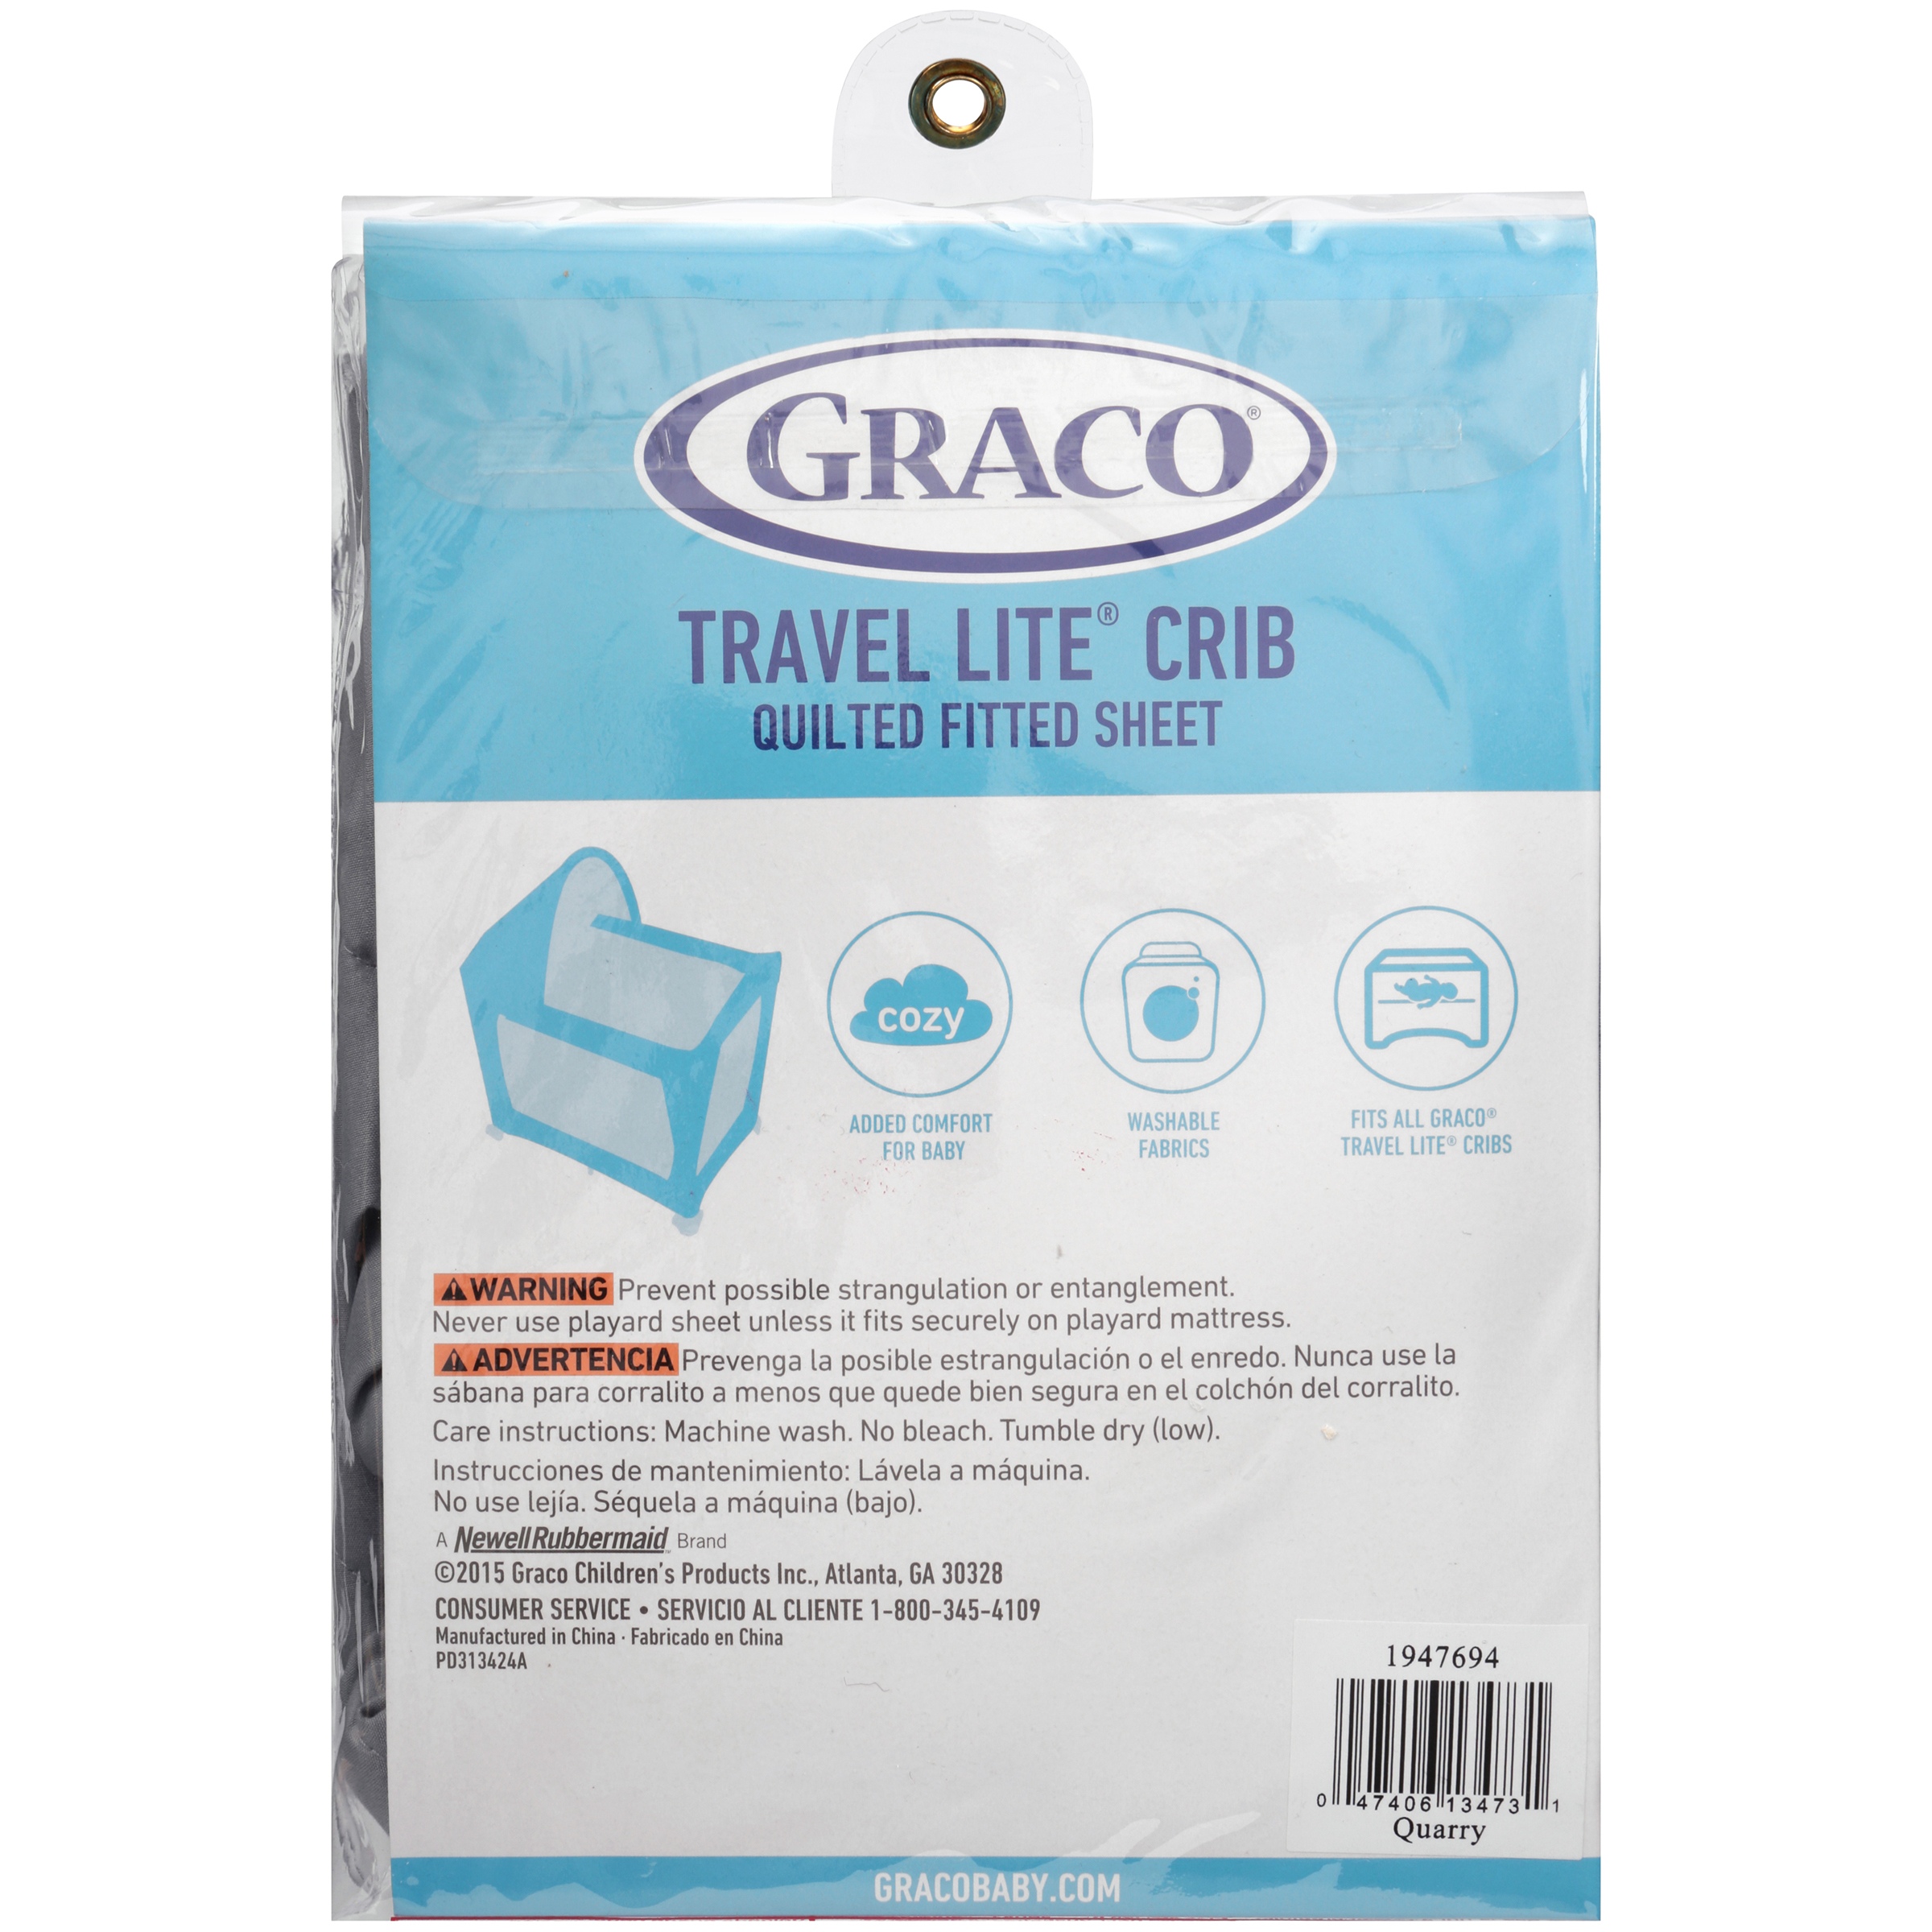 Graco Travel Lite Crib Quarry Quilted Fitted Sheet Walmart.com